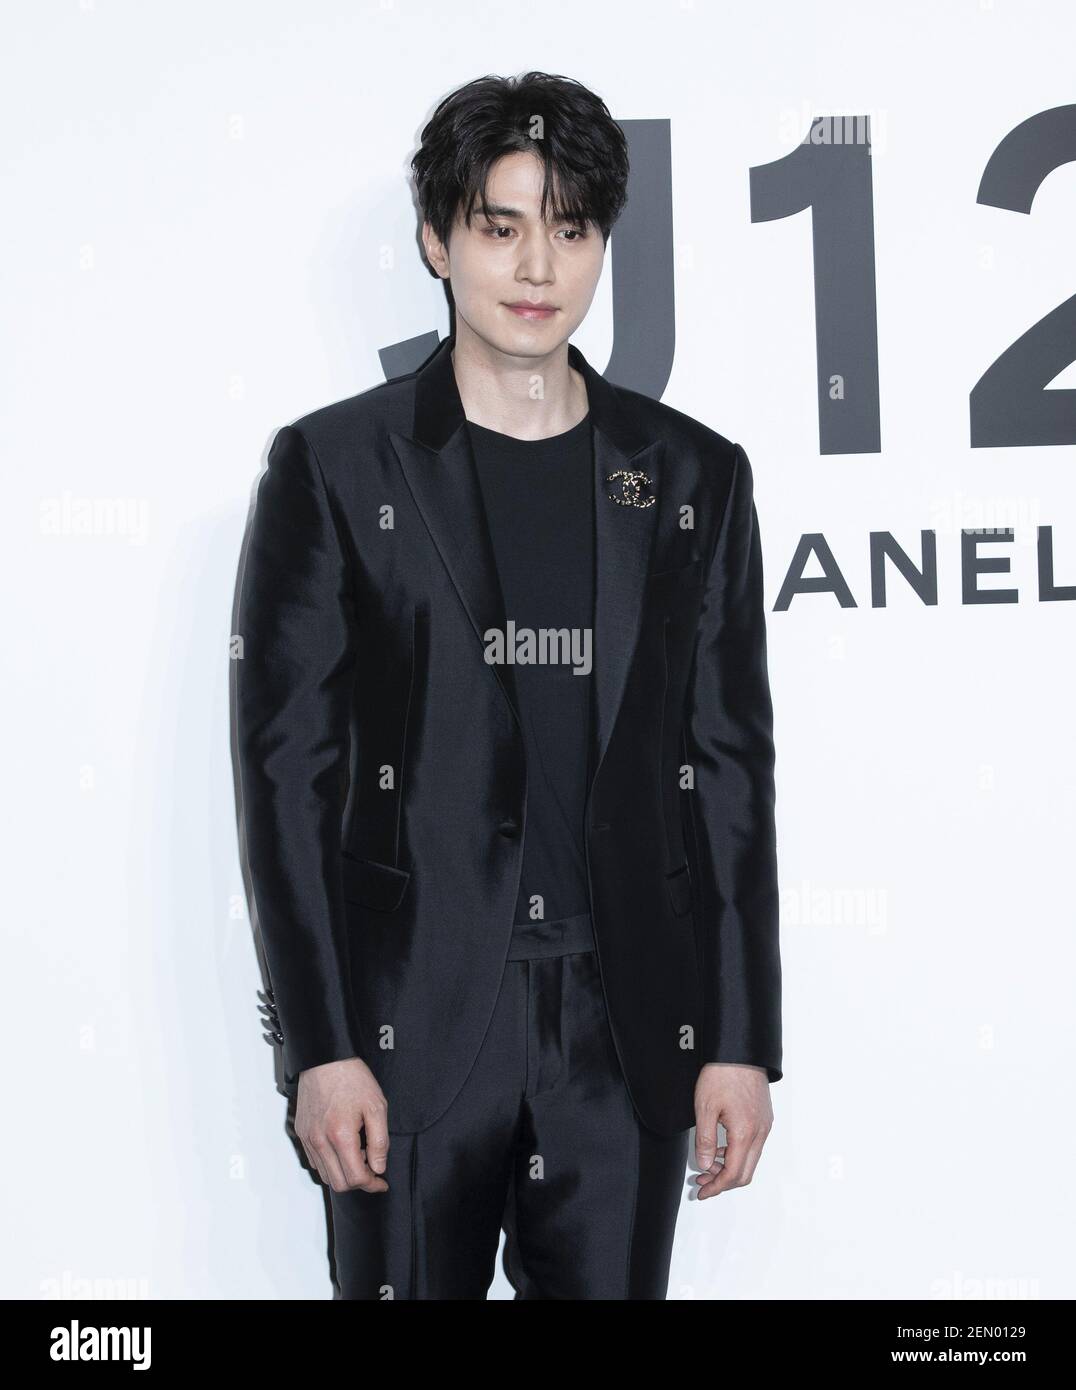 South Korean actor Lee Dong-wook, attends a photocall for the Fashion Brand  'Chanel The New J12' flag shop launching in Seoul, South Korea on May 8,  2019. (Photo by Lee Young-ho/Sipa USA